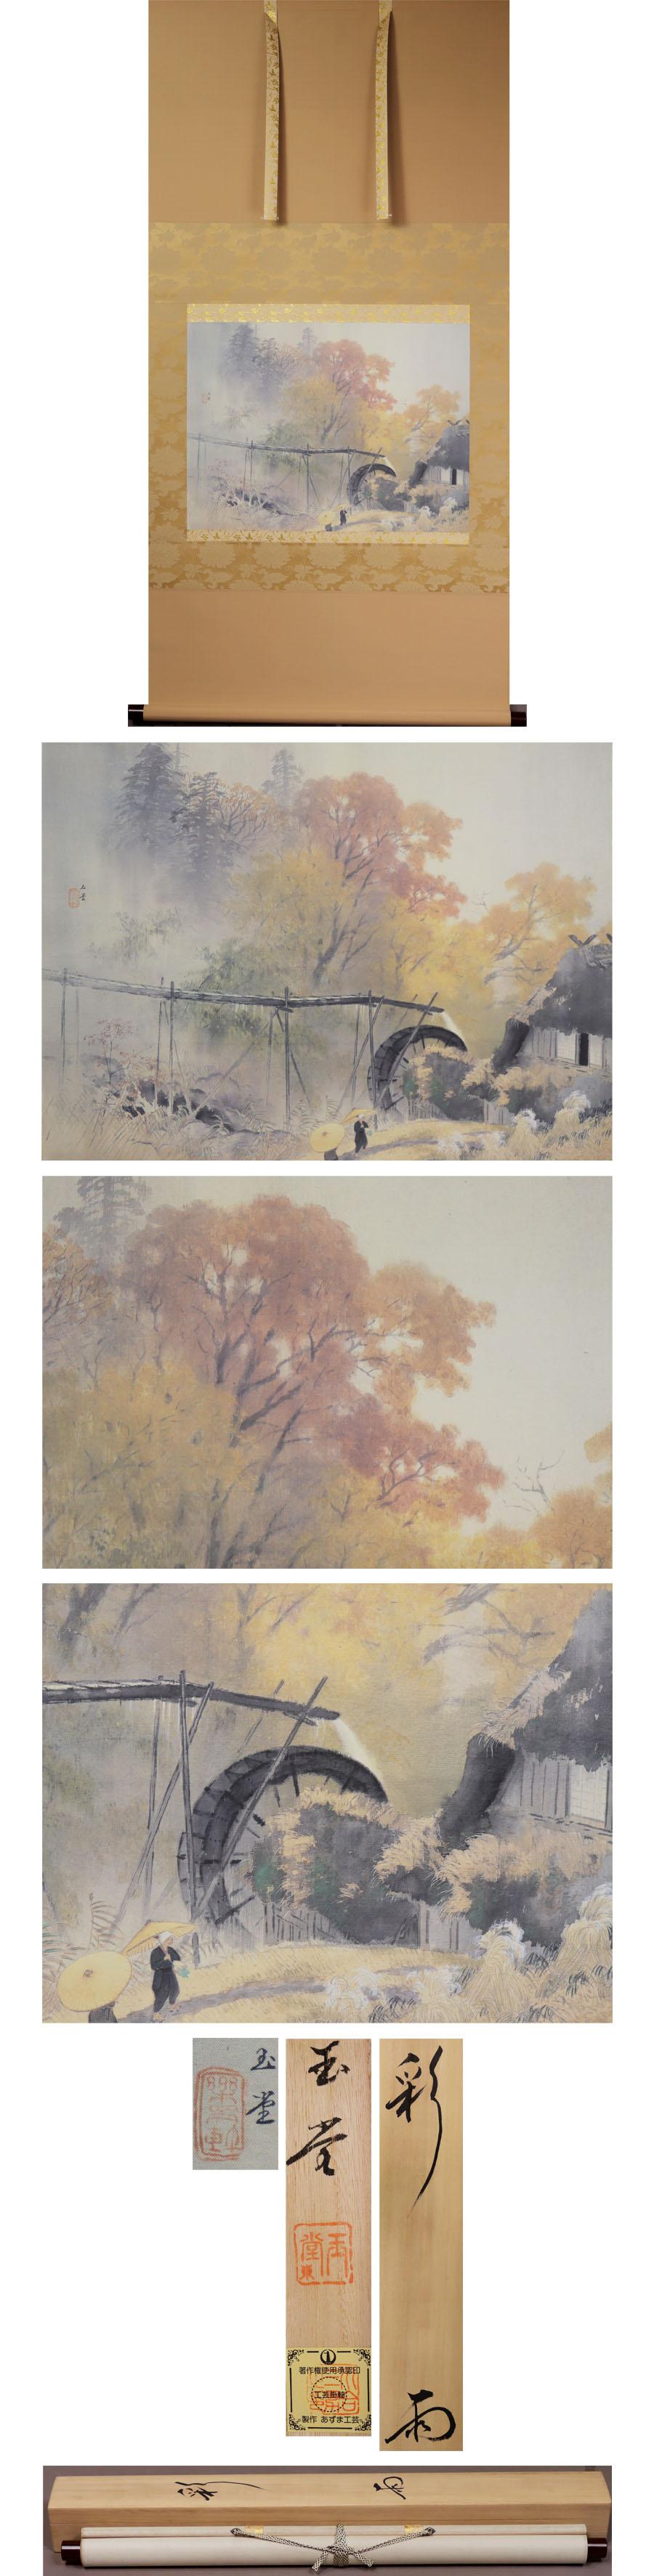 Lovely Japanese 20th c Scroll by Gyokudo Kawai [1873-1957] Autumn Landscape  In Good Condition For Sale In Amsterdam, Noord Holland